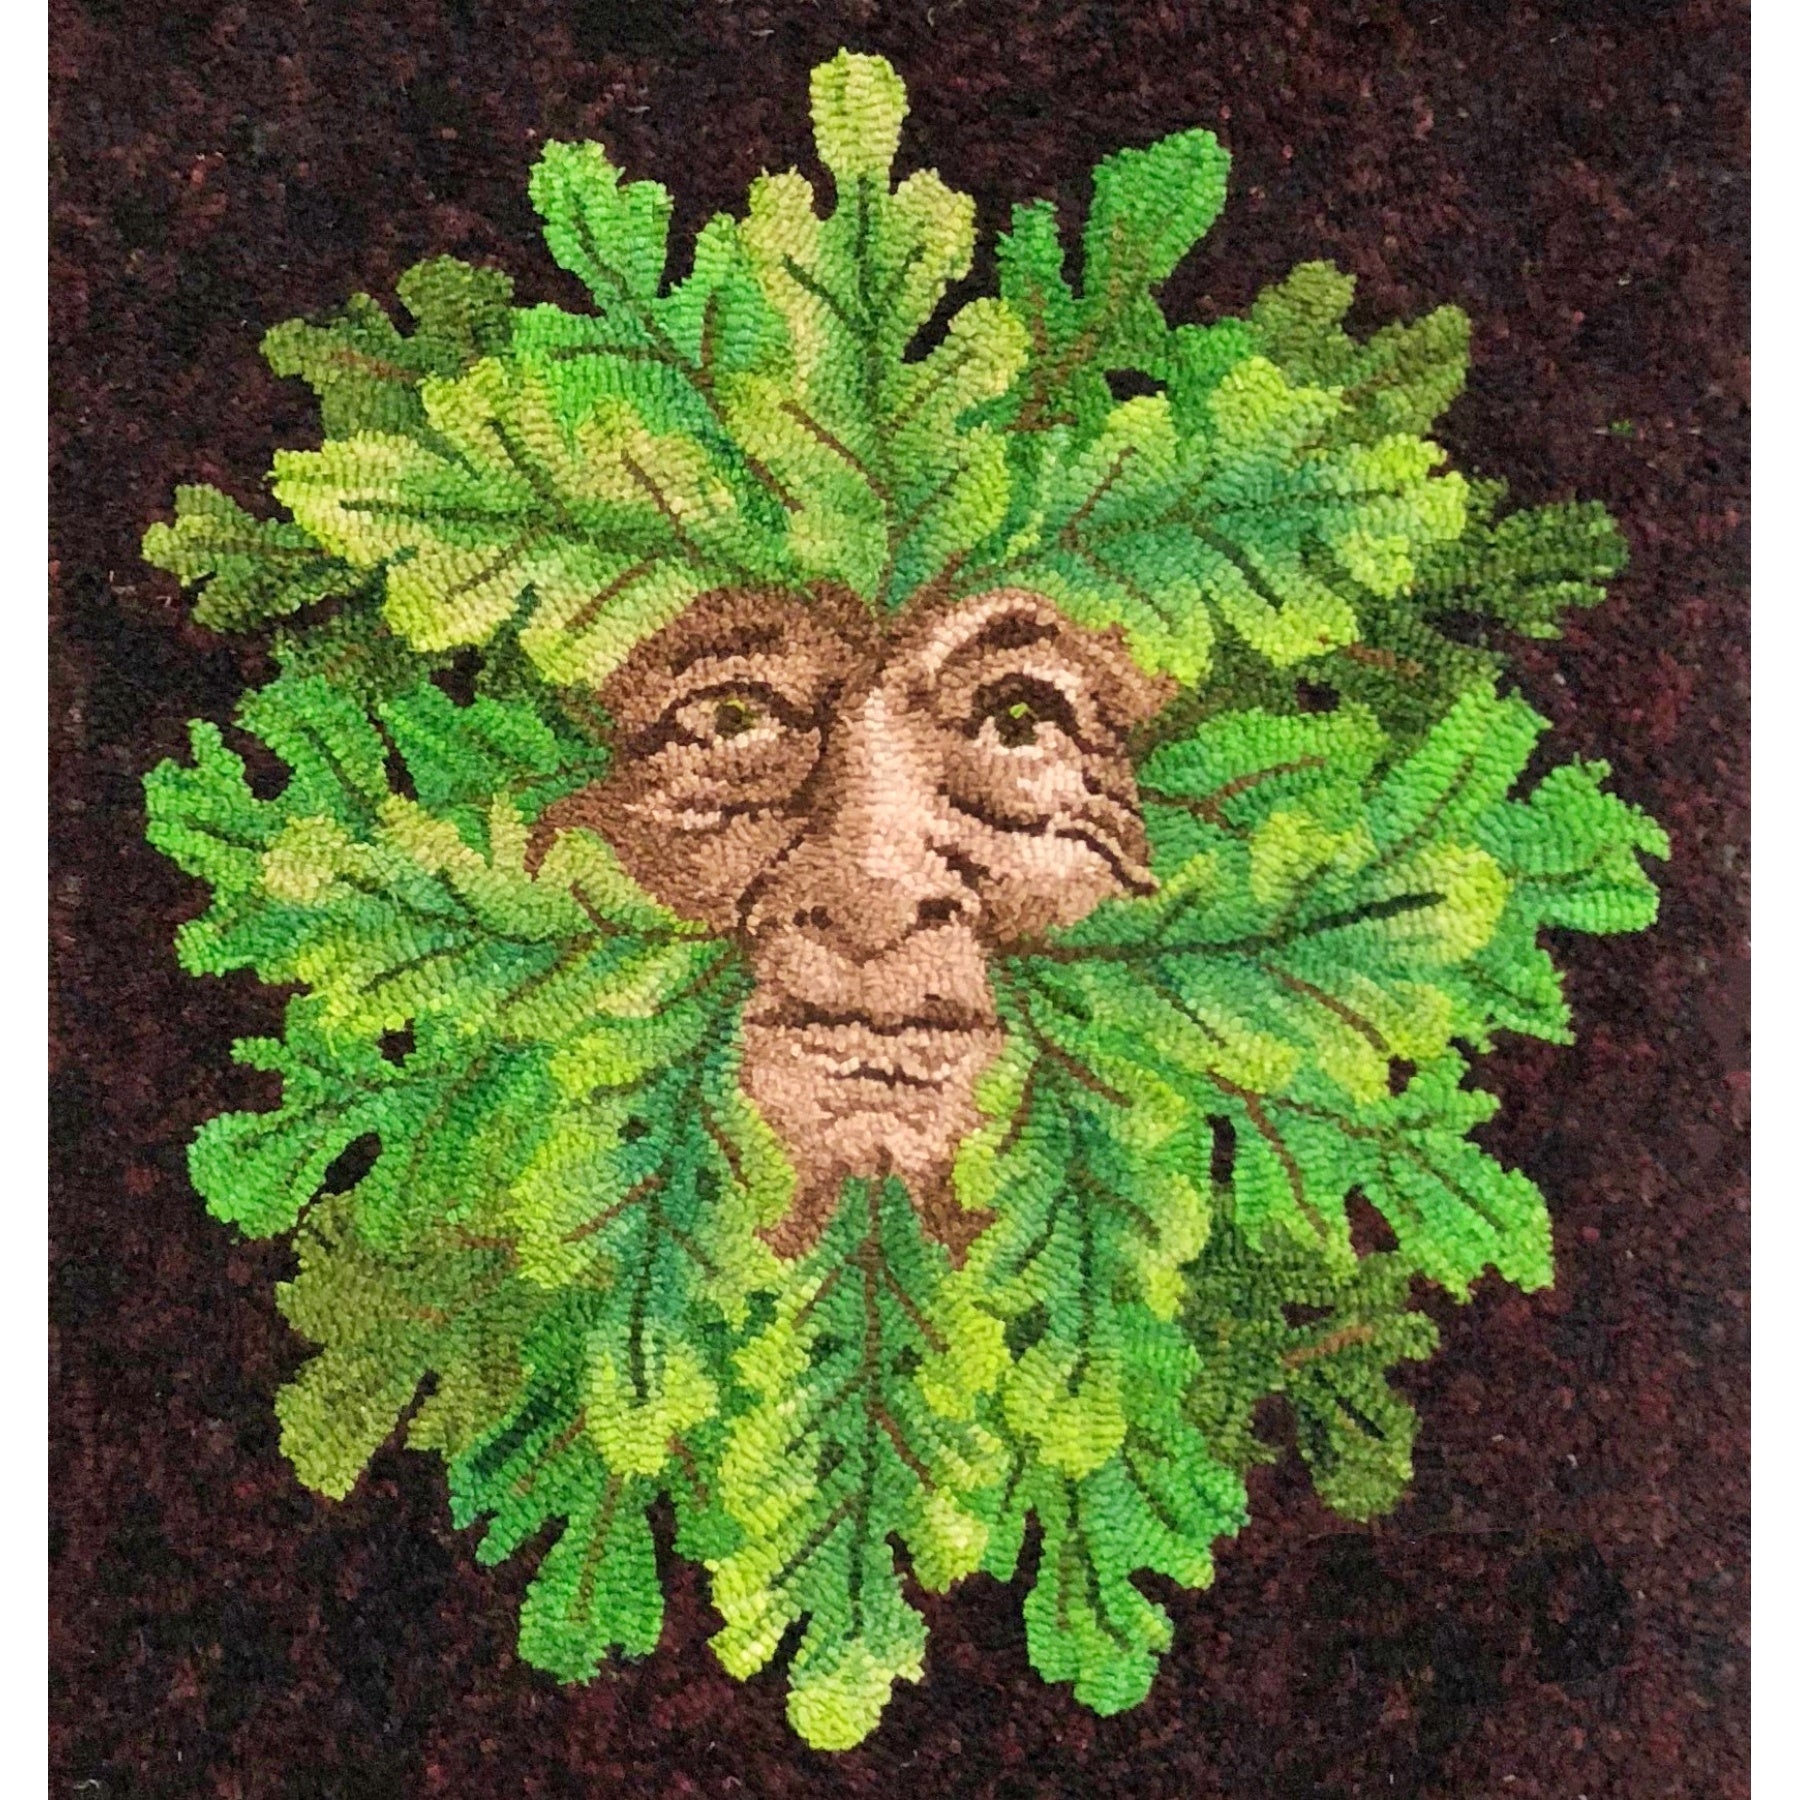 Jack-In-The-Green, rug hooked by Steve Naftel